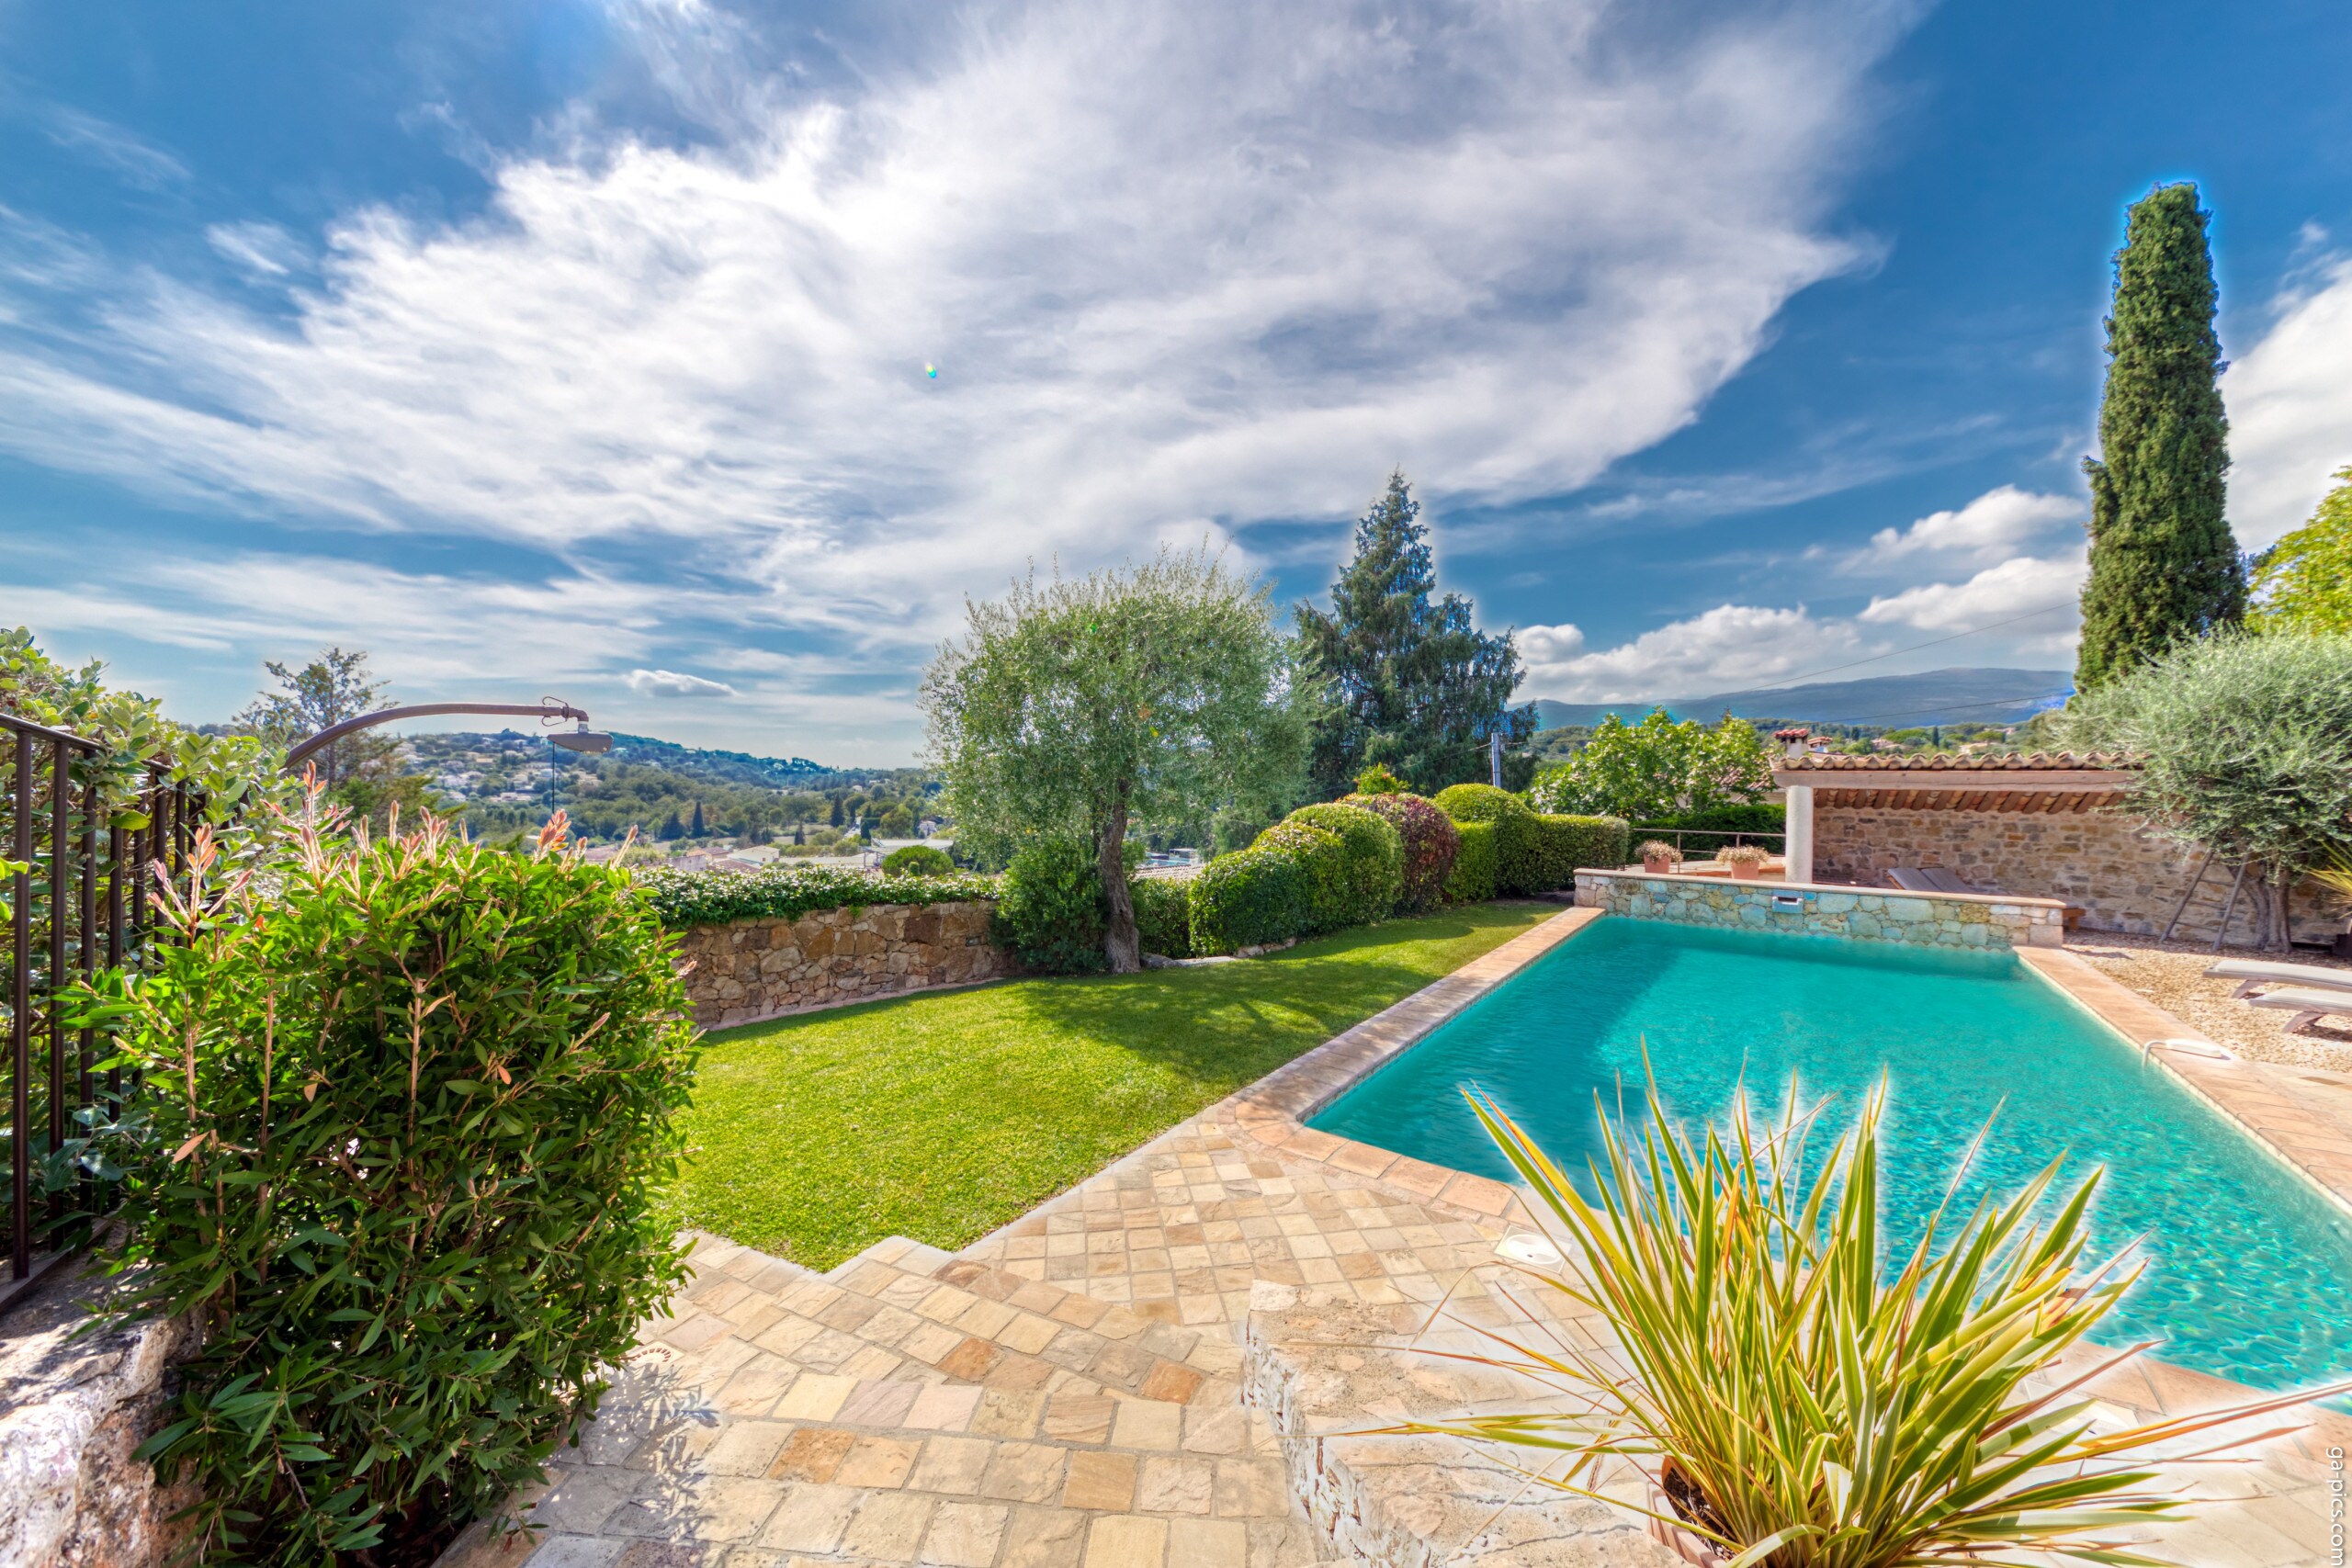 Property Image 2 - Beautifully renovated house with stunning views over Valbonne, just a stroll into the village